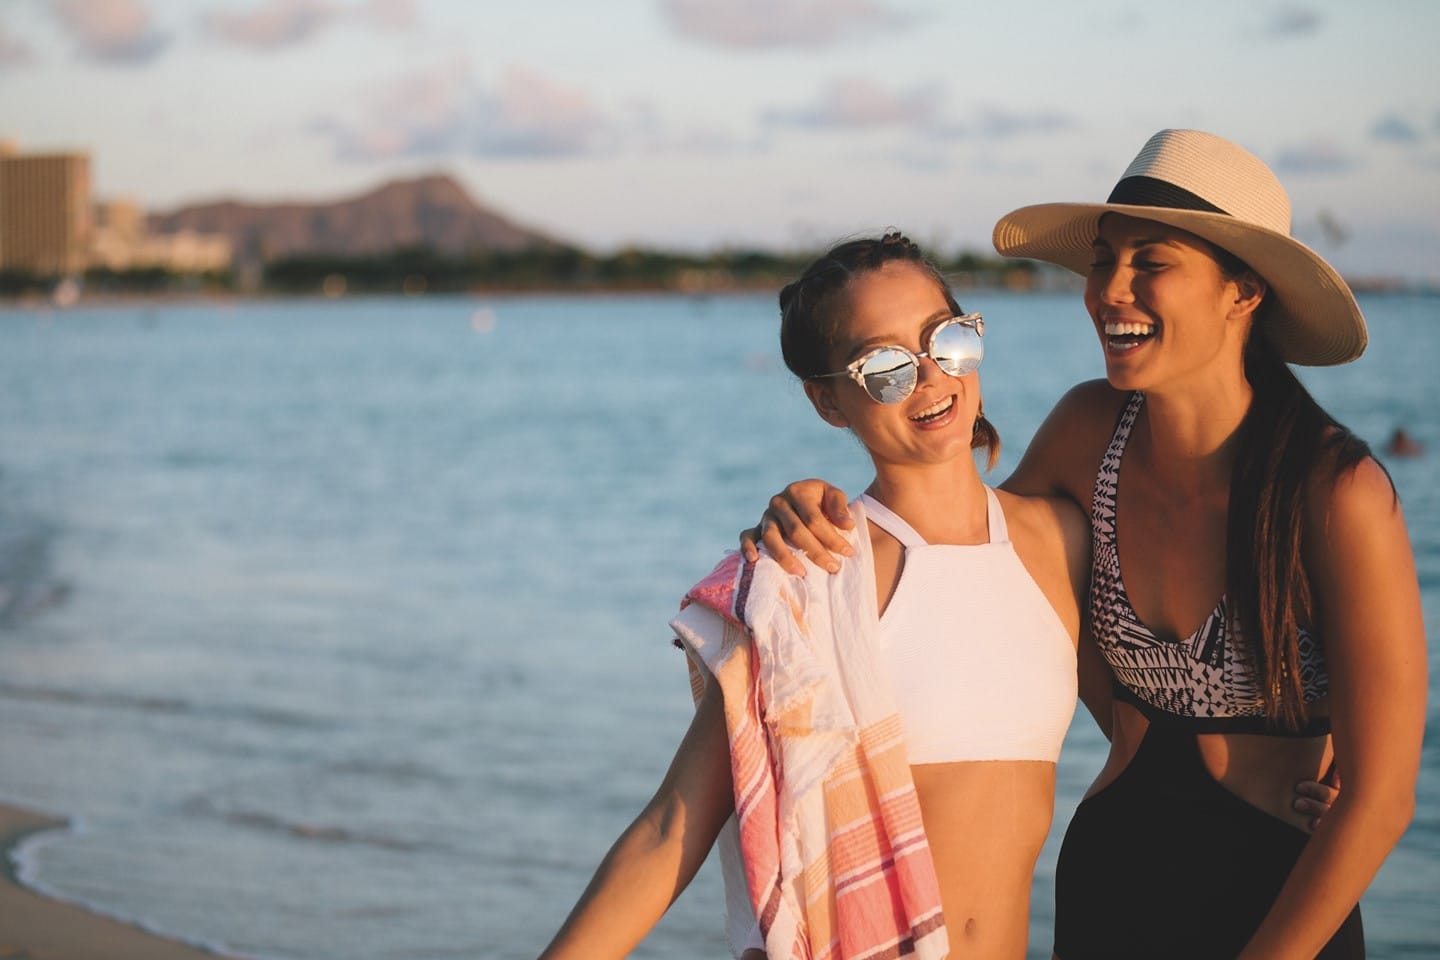 Happy Aloha Friday! What do you have planned for the weekend? Join us for a swim at Ala Moana Beach Park, a stroll through Ward Village for unique shopping and dining experiences or lounging with a picnic under the palms at Victoria Ward Park.